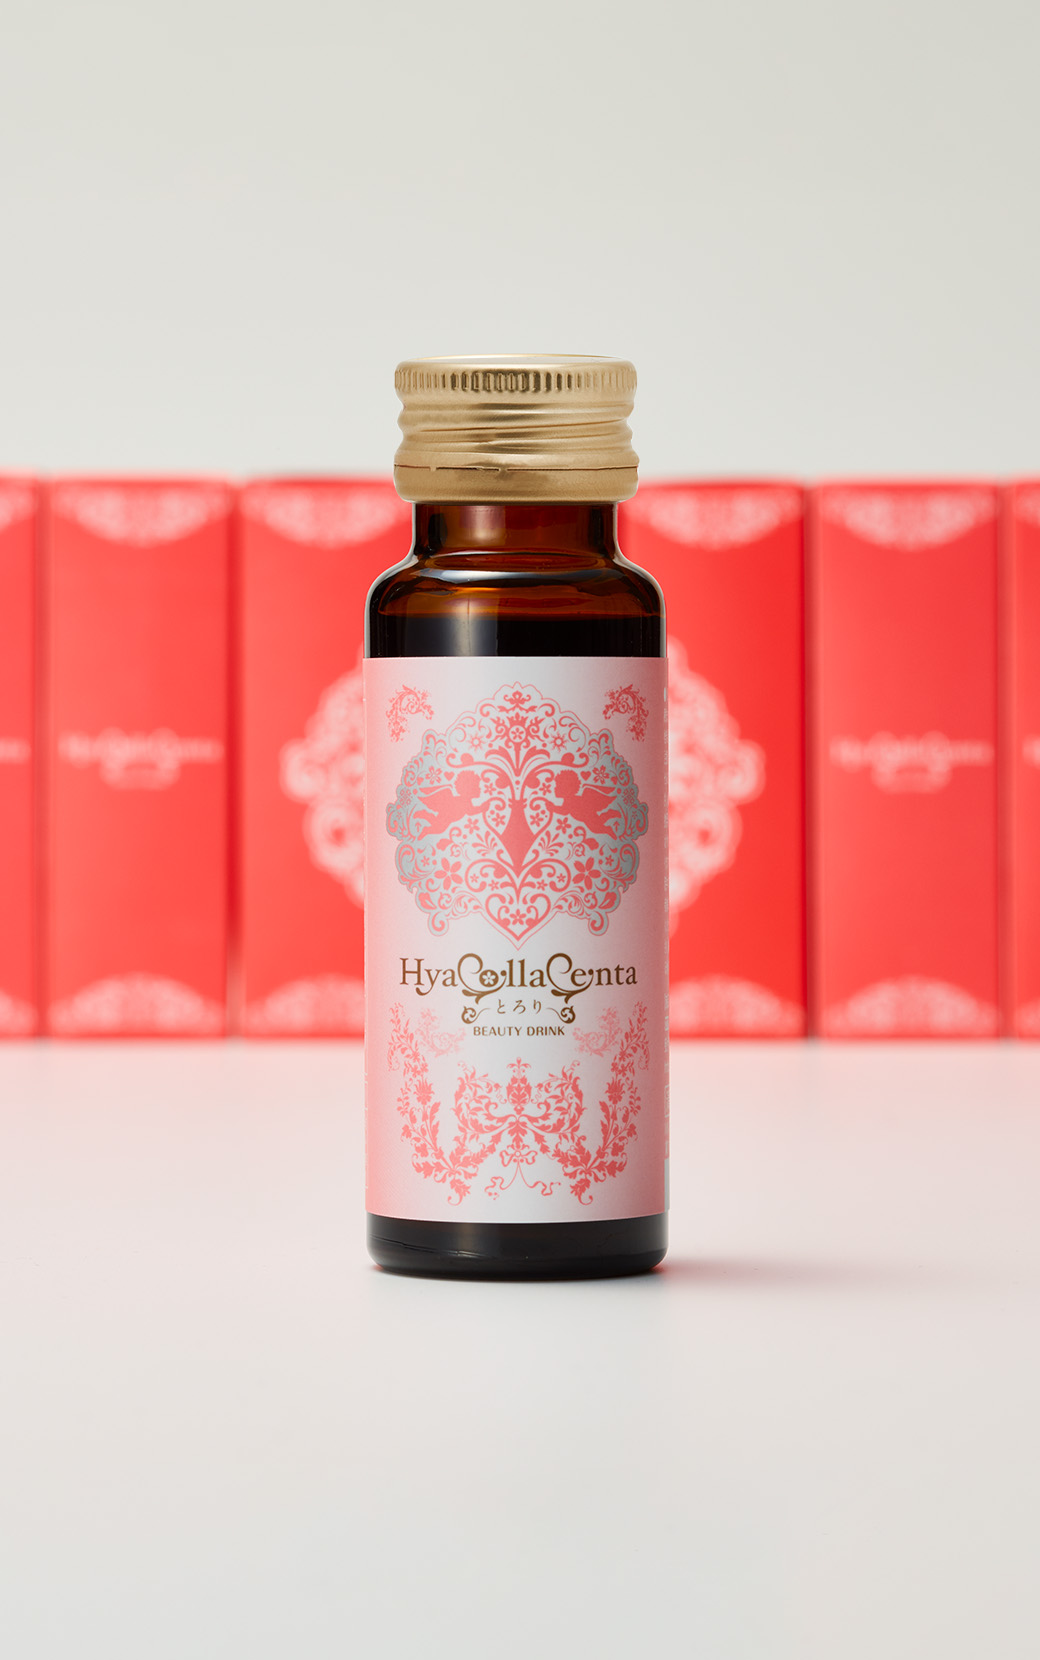 HyaCollaCenta～とろり～ BEAUTY DRINK　7本セット